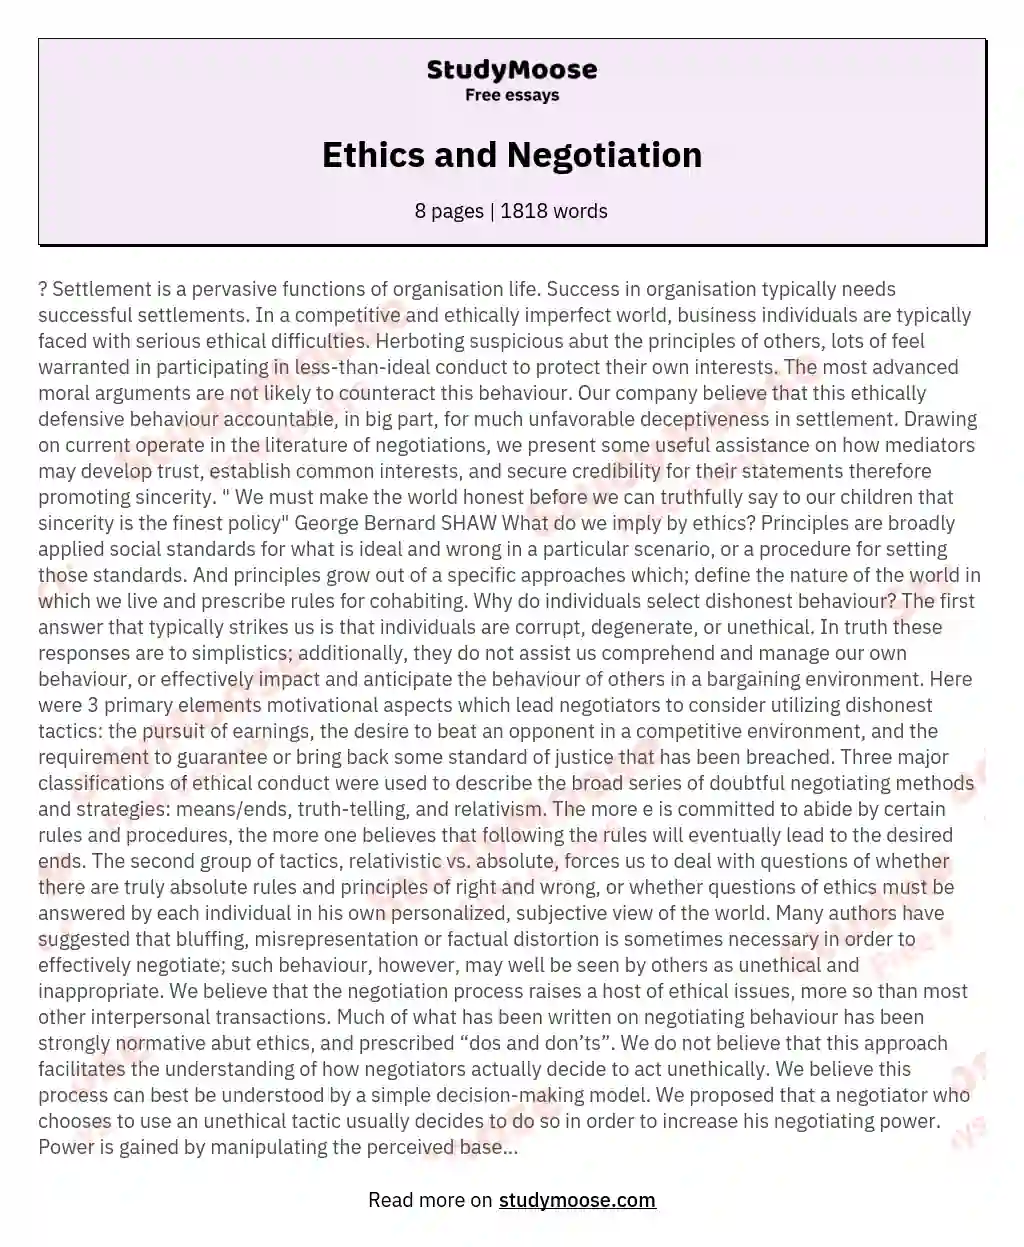 Ethics and Negotiation essay